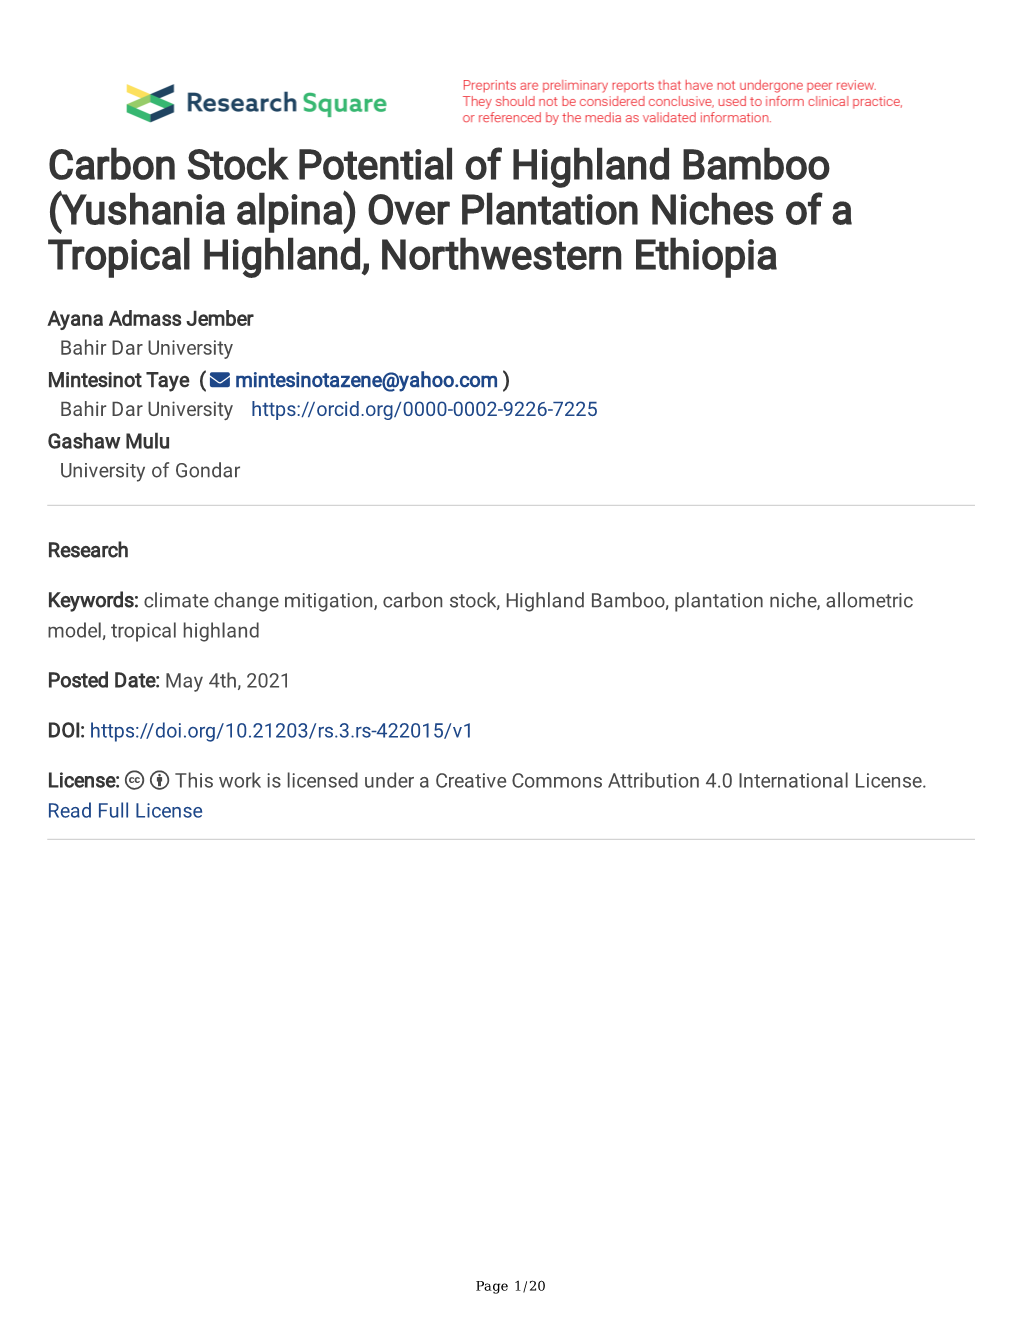 Carbon Stock Potential of Highland Bamboo (Yushania Alpina) Over Plantation Niches of a Tropical Highland, Northwestern Ethiopia